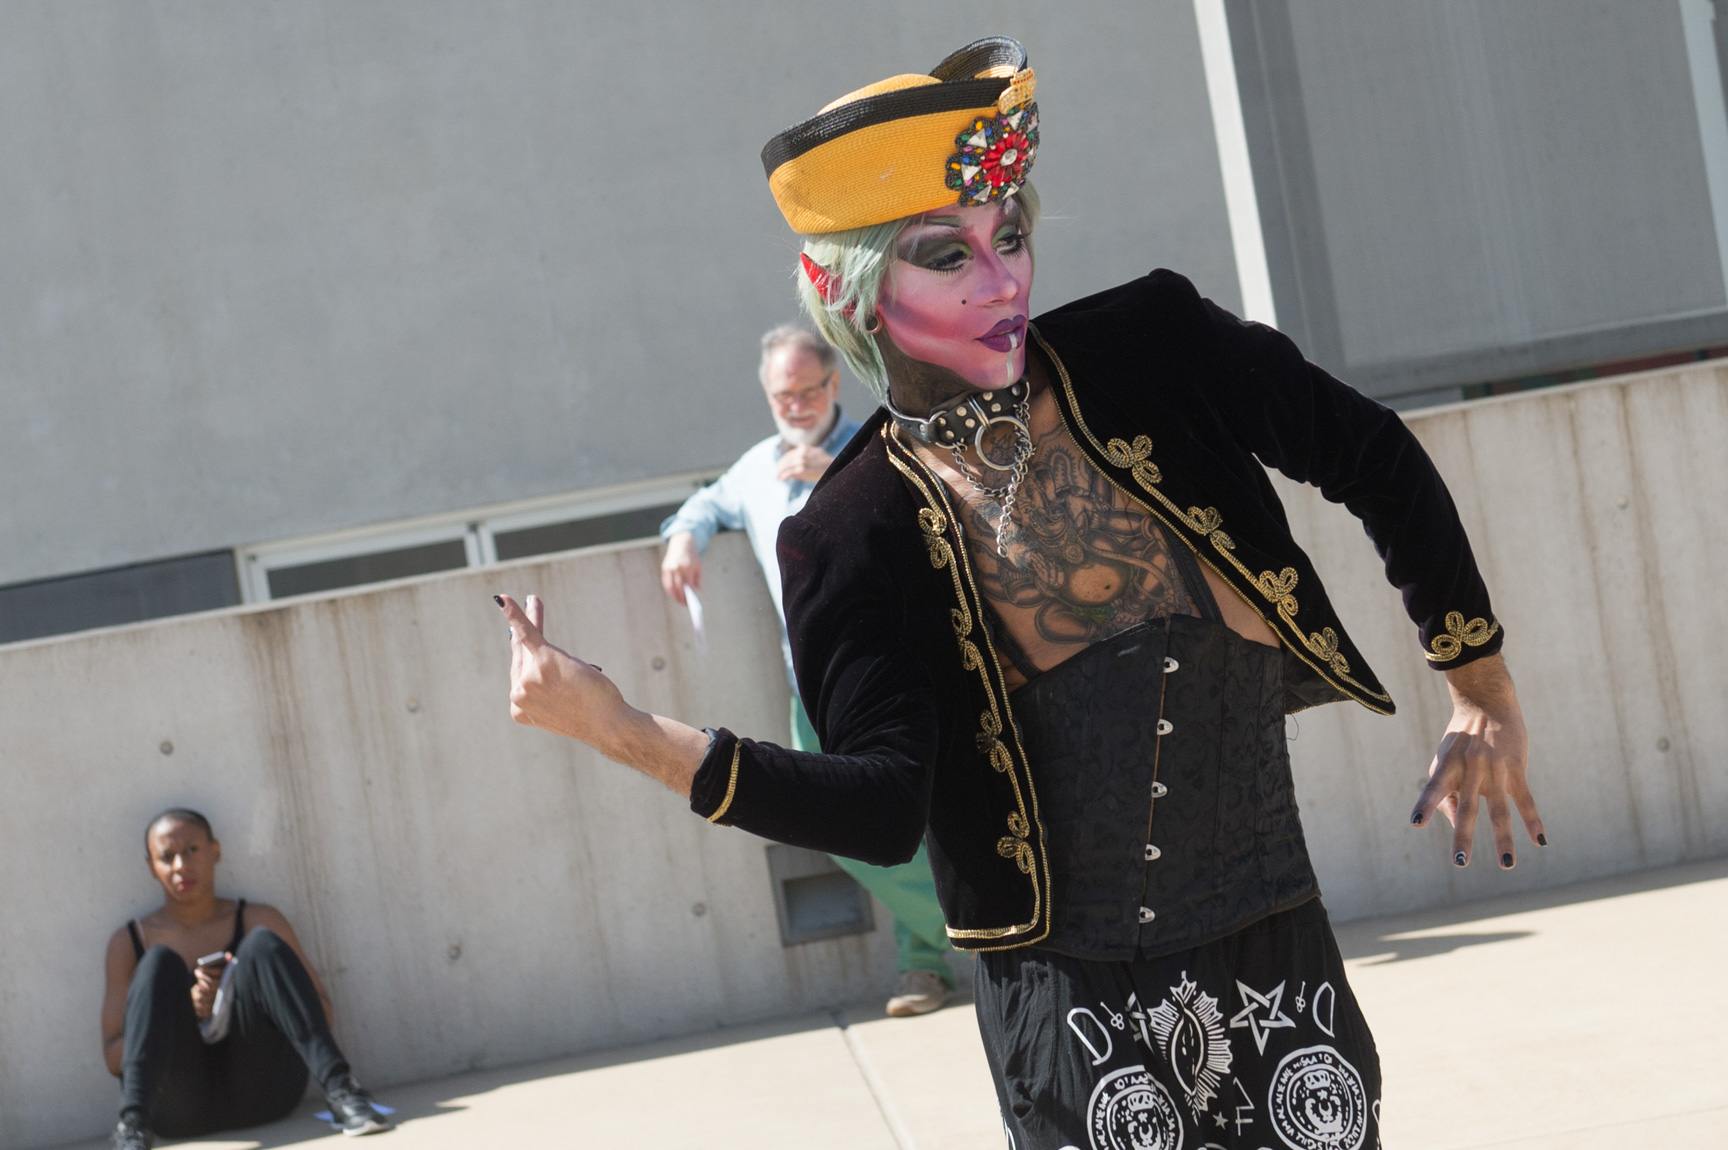 An AUNTS performer dressed in drag dances in the Courtyard for an audience.